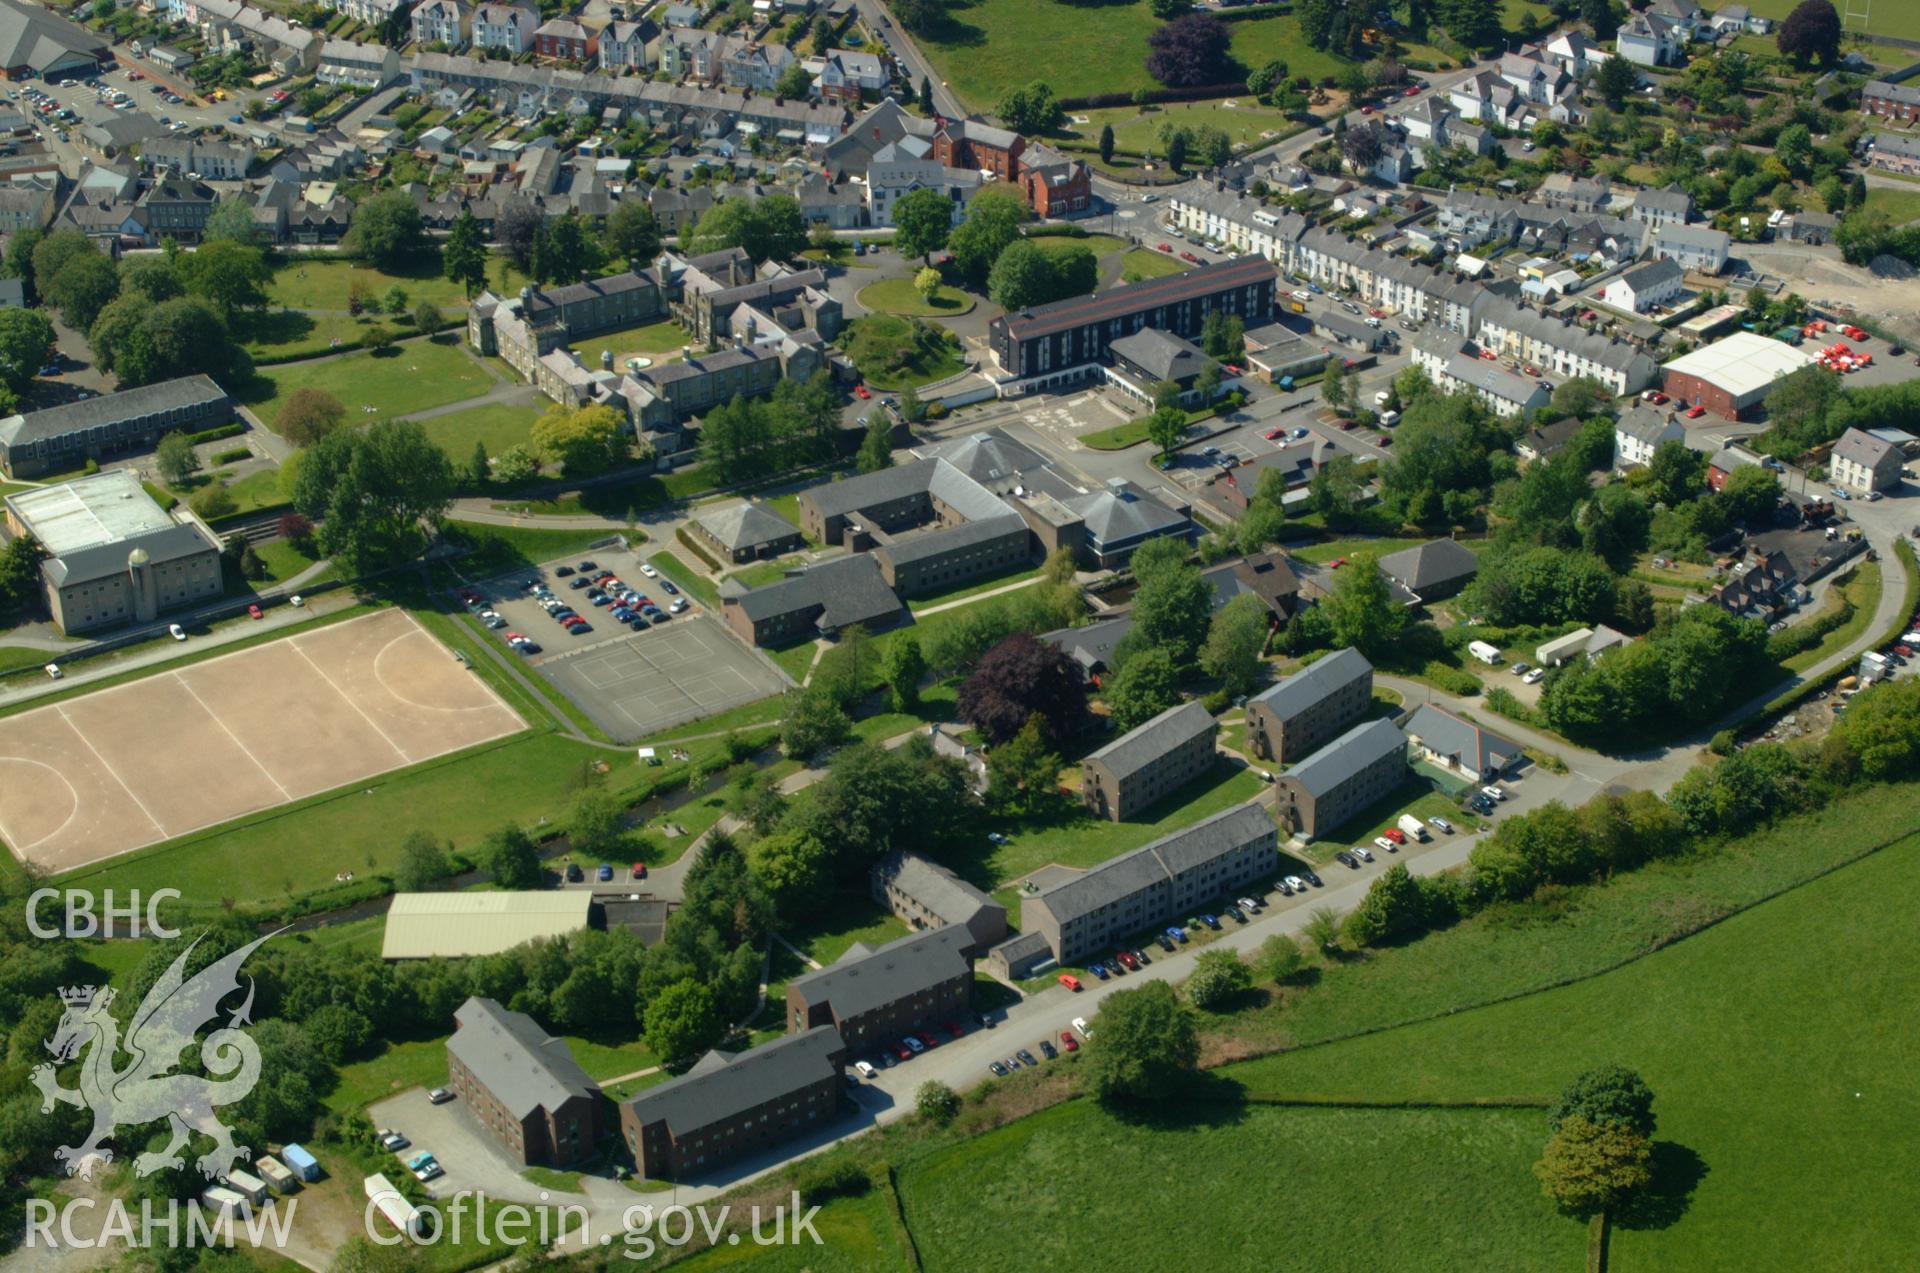 RCAHMW colour oblique aerial photograph of St David's College, Lampeter taken on 24/05/2004 by Toby Driver